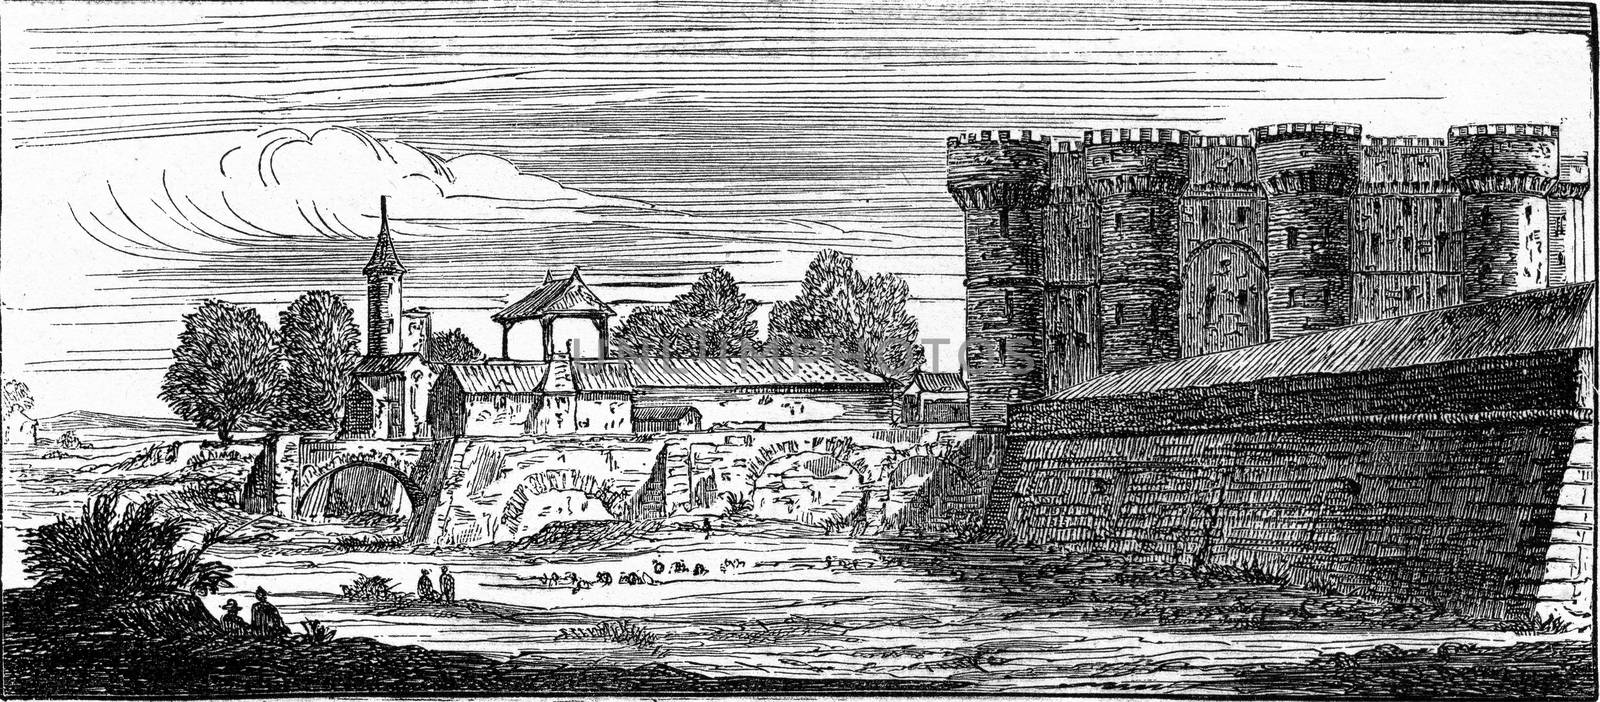 The Bastille, after an old engraving of the topography of Paris, vintage engraved illustration. Industrial encyclopedia E.-O. Lami - 1875.
